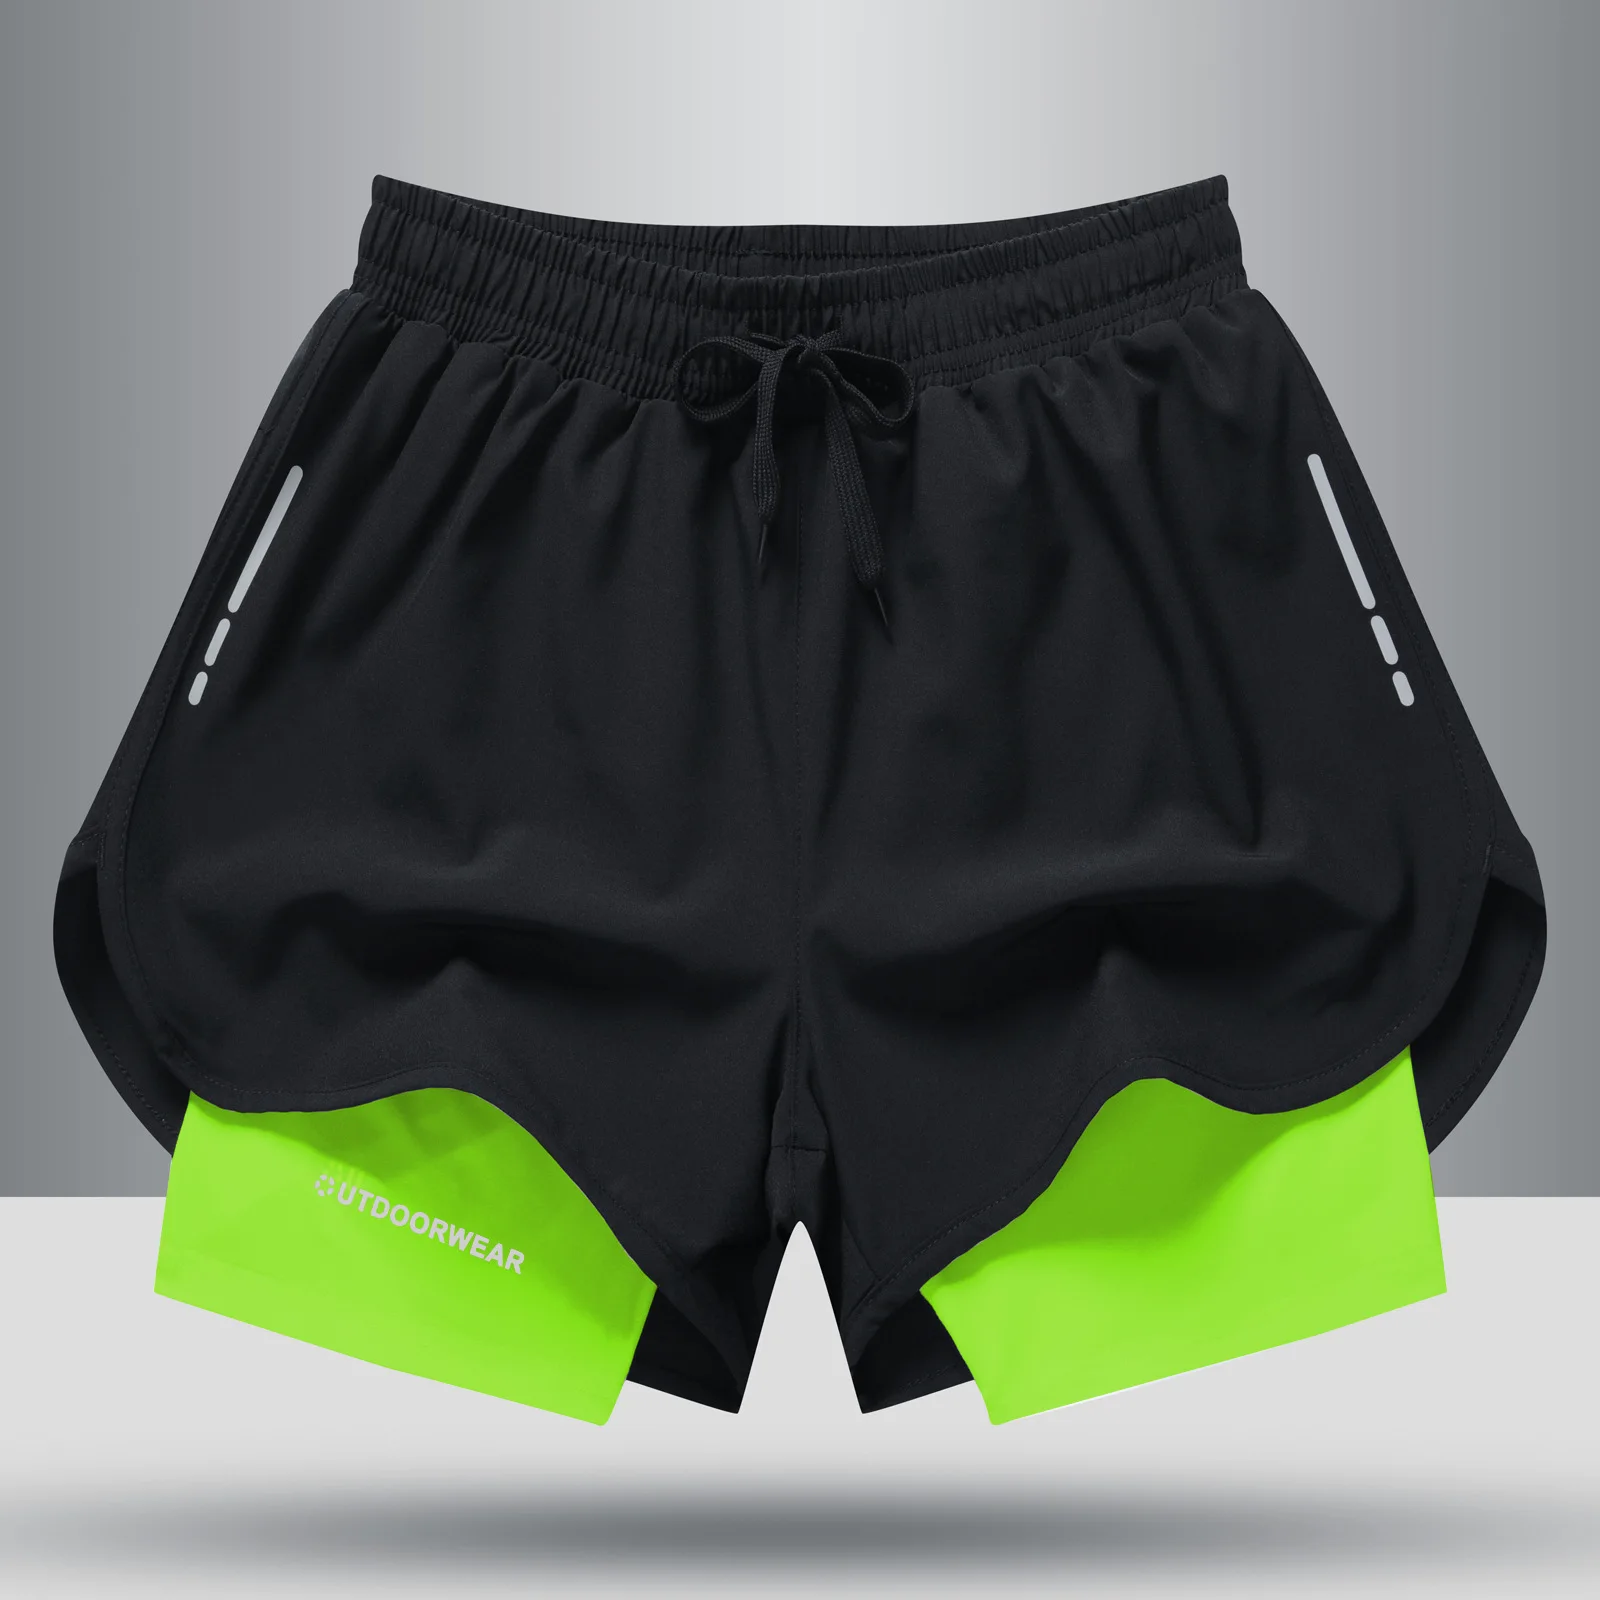 Gym Shorts 2 In 1 Polyester Quick Dry Outdoor Compression Shorts ...